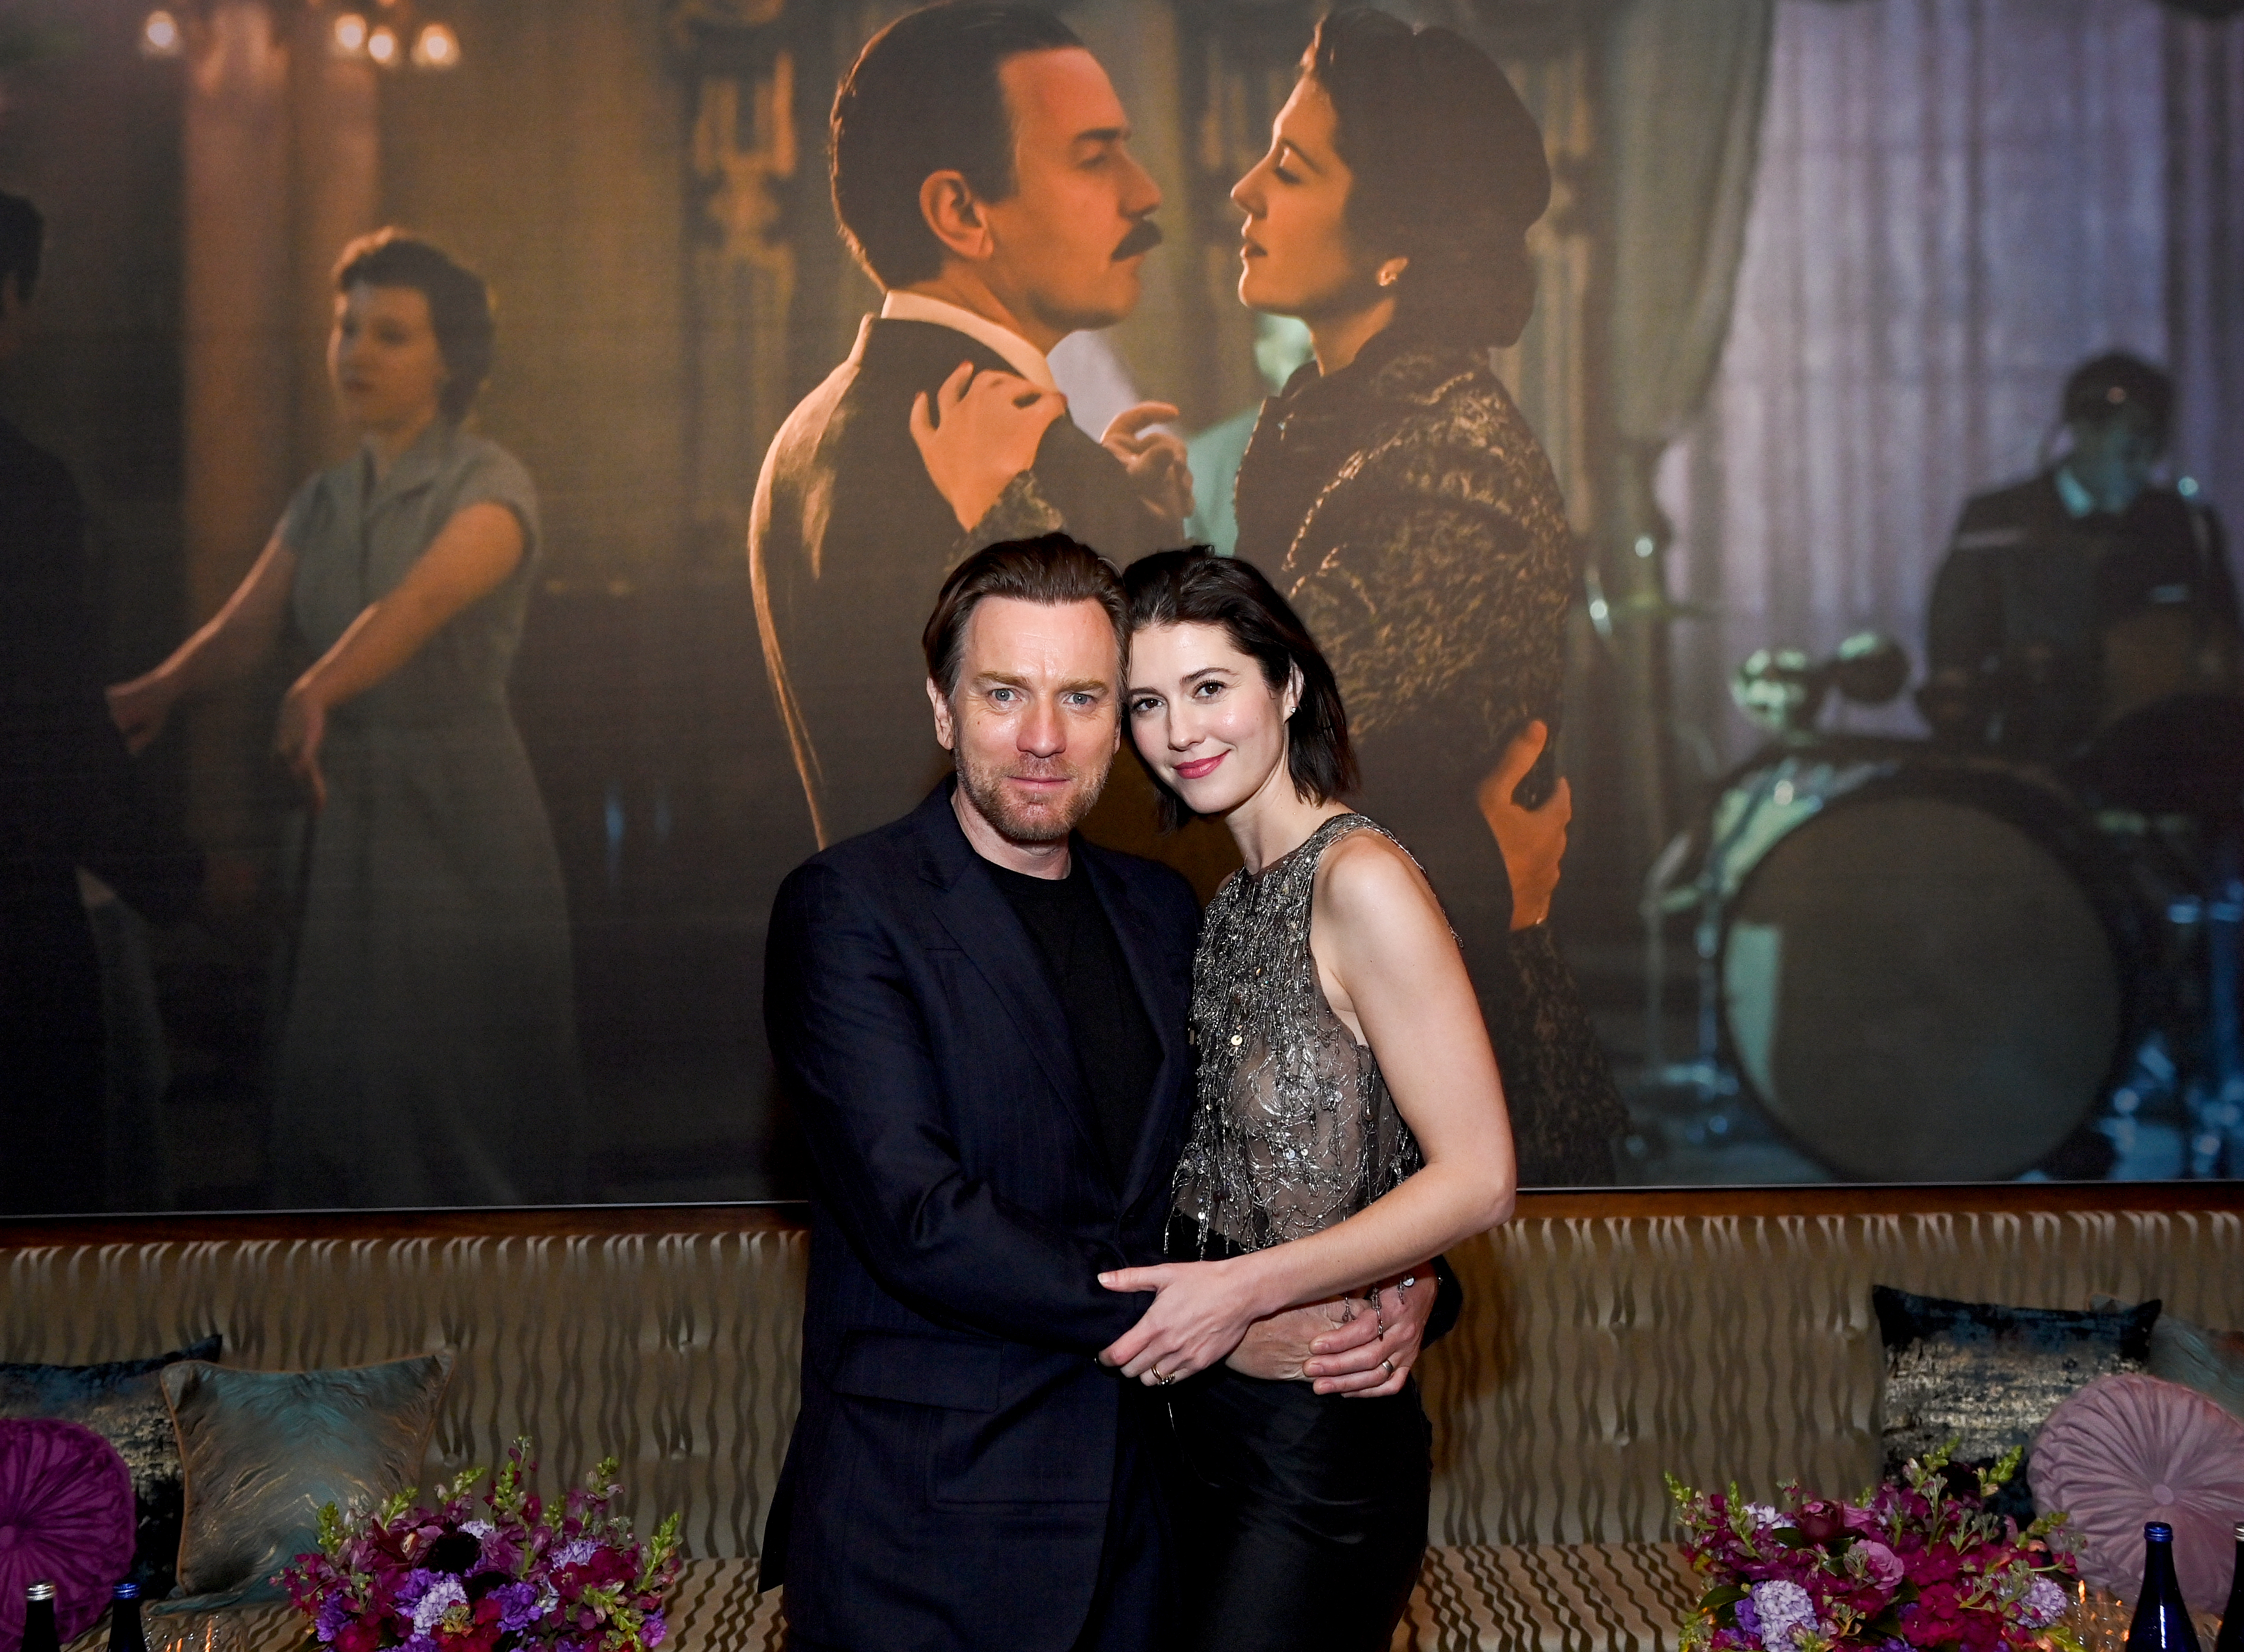 Ewan McGregor Attends Event With Wife